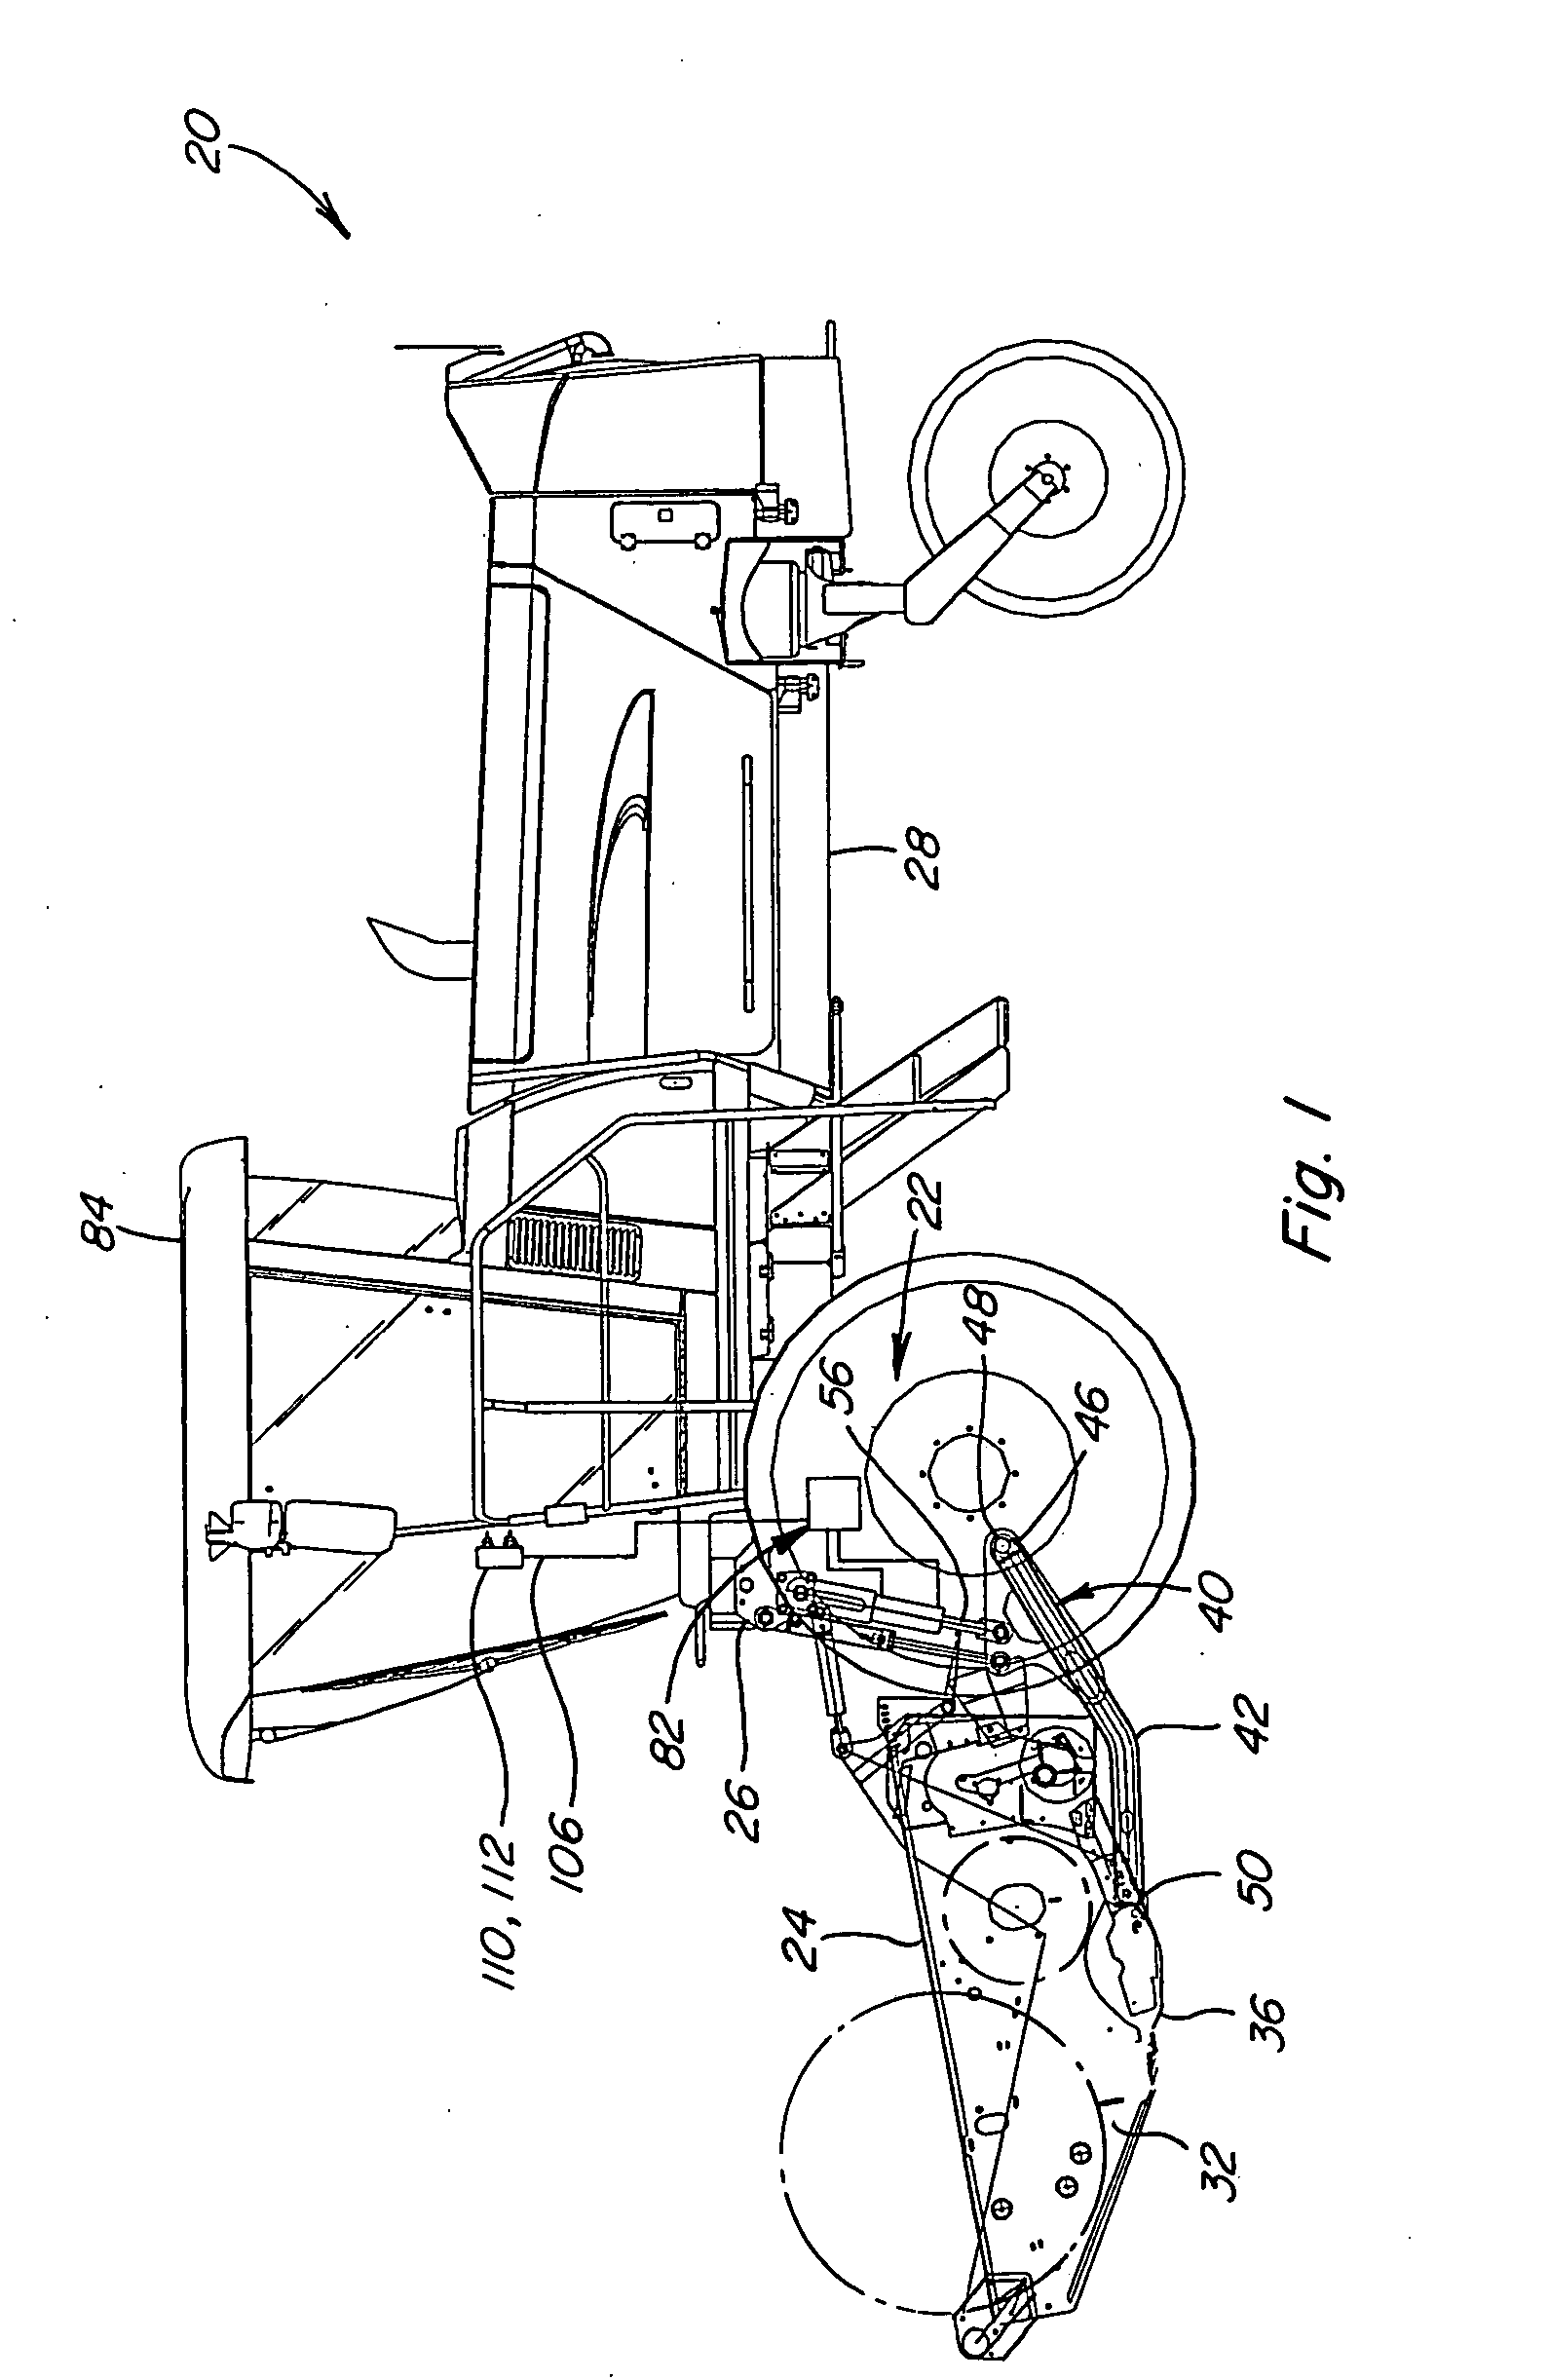 Header height control system and apparatus